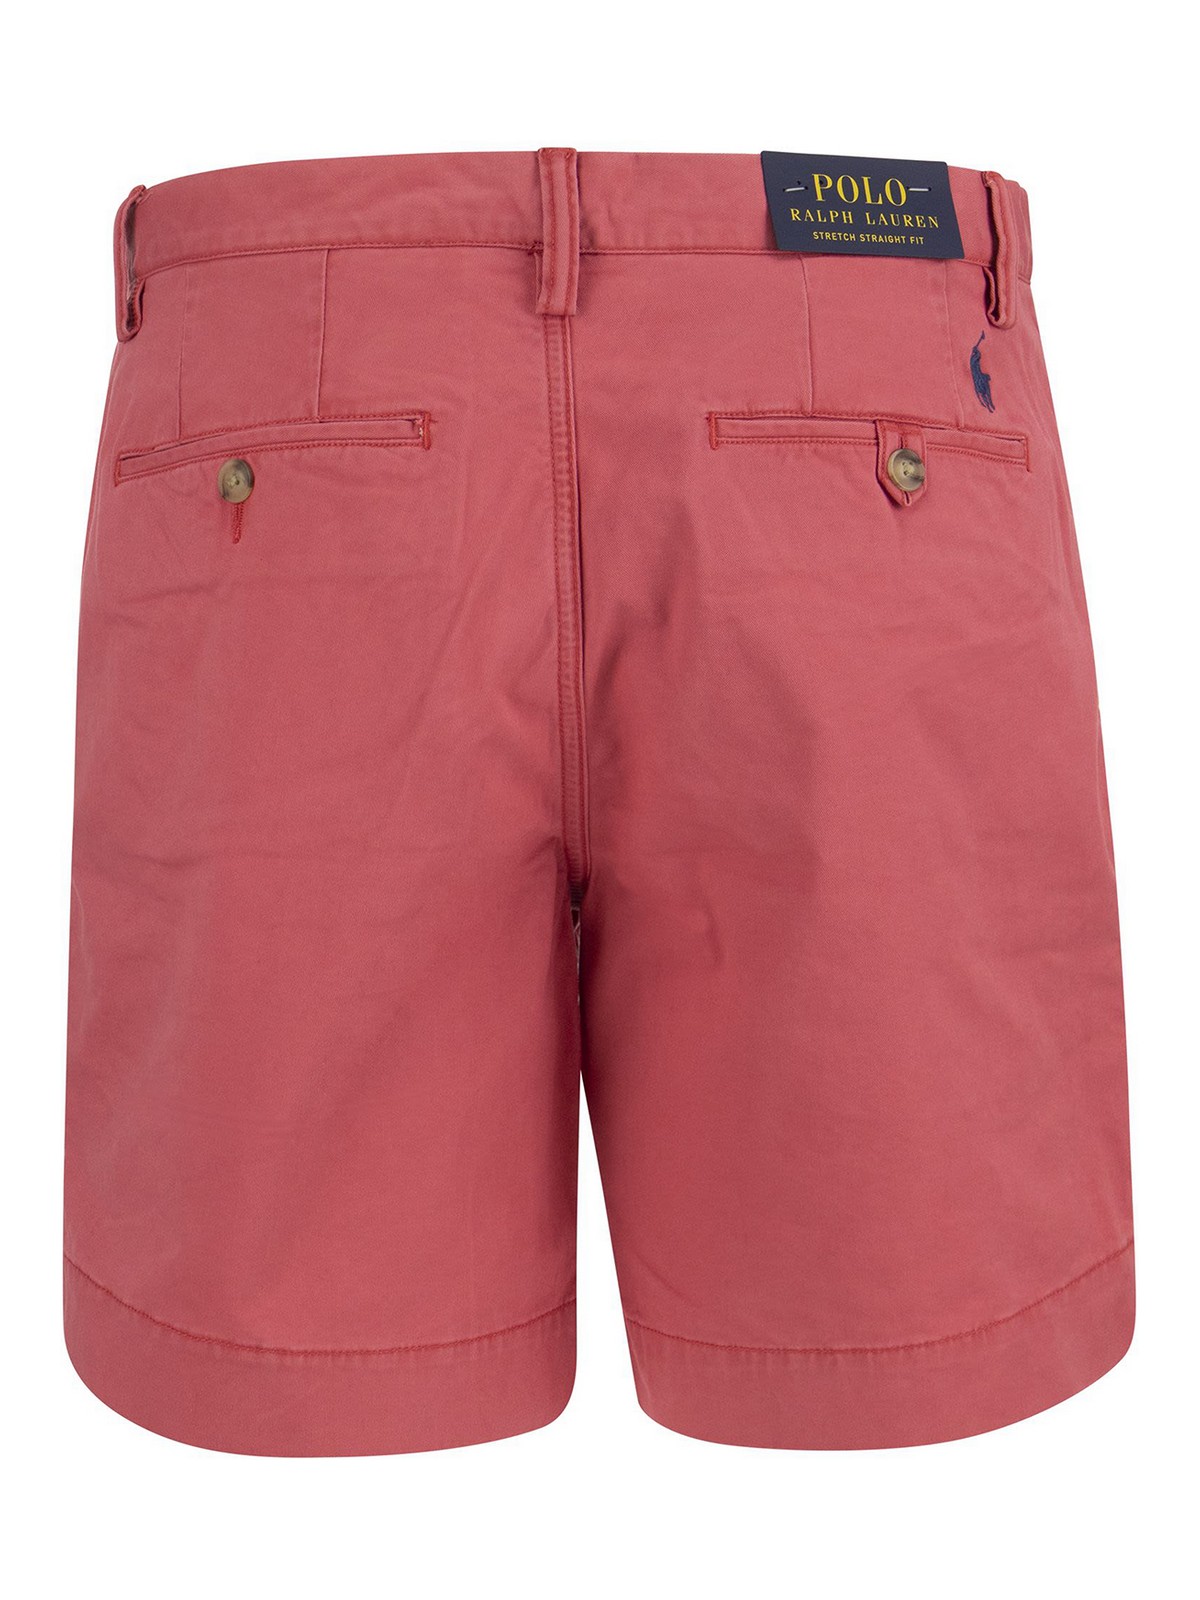 Trousers Shorts Polo Ralph Lauren - Stretch classic fit chino shorts -  710799213014